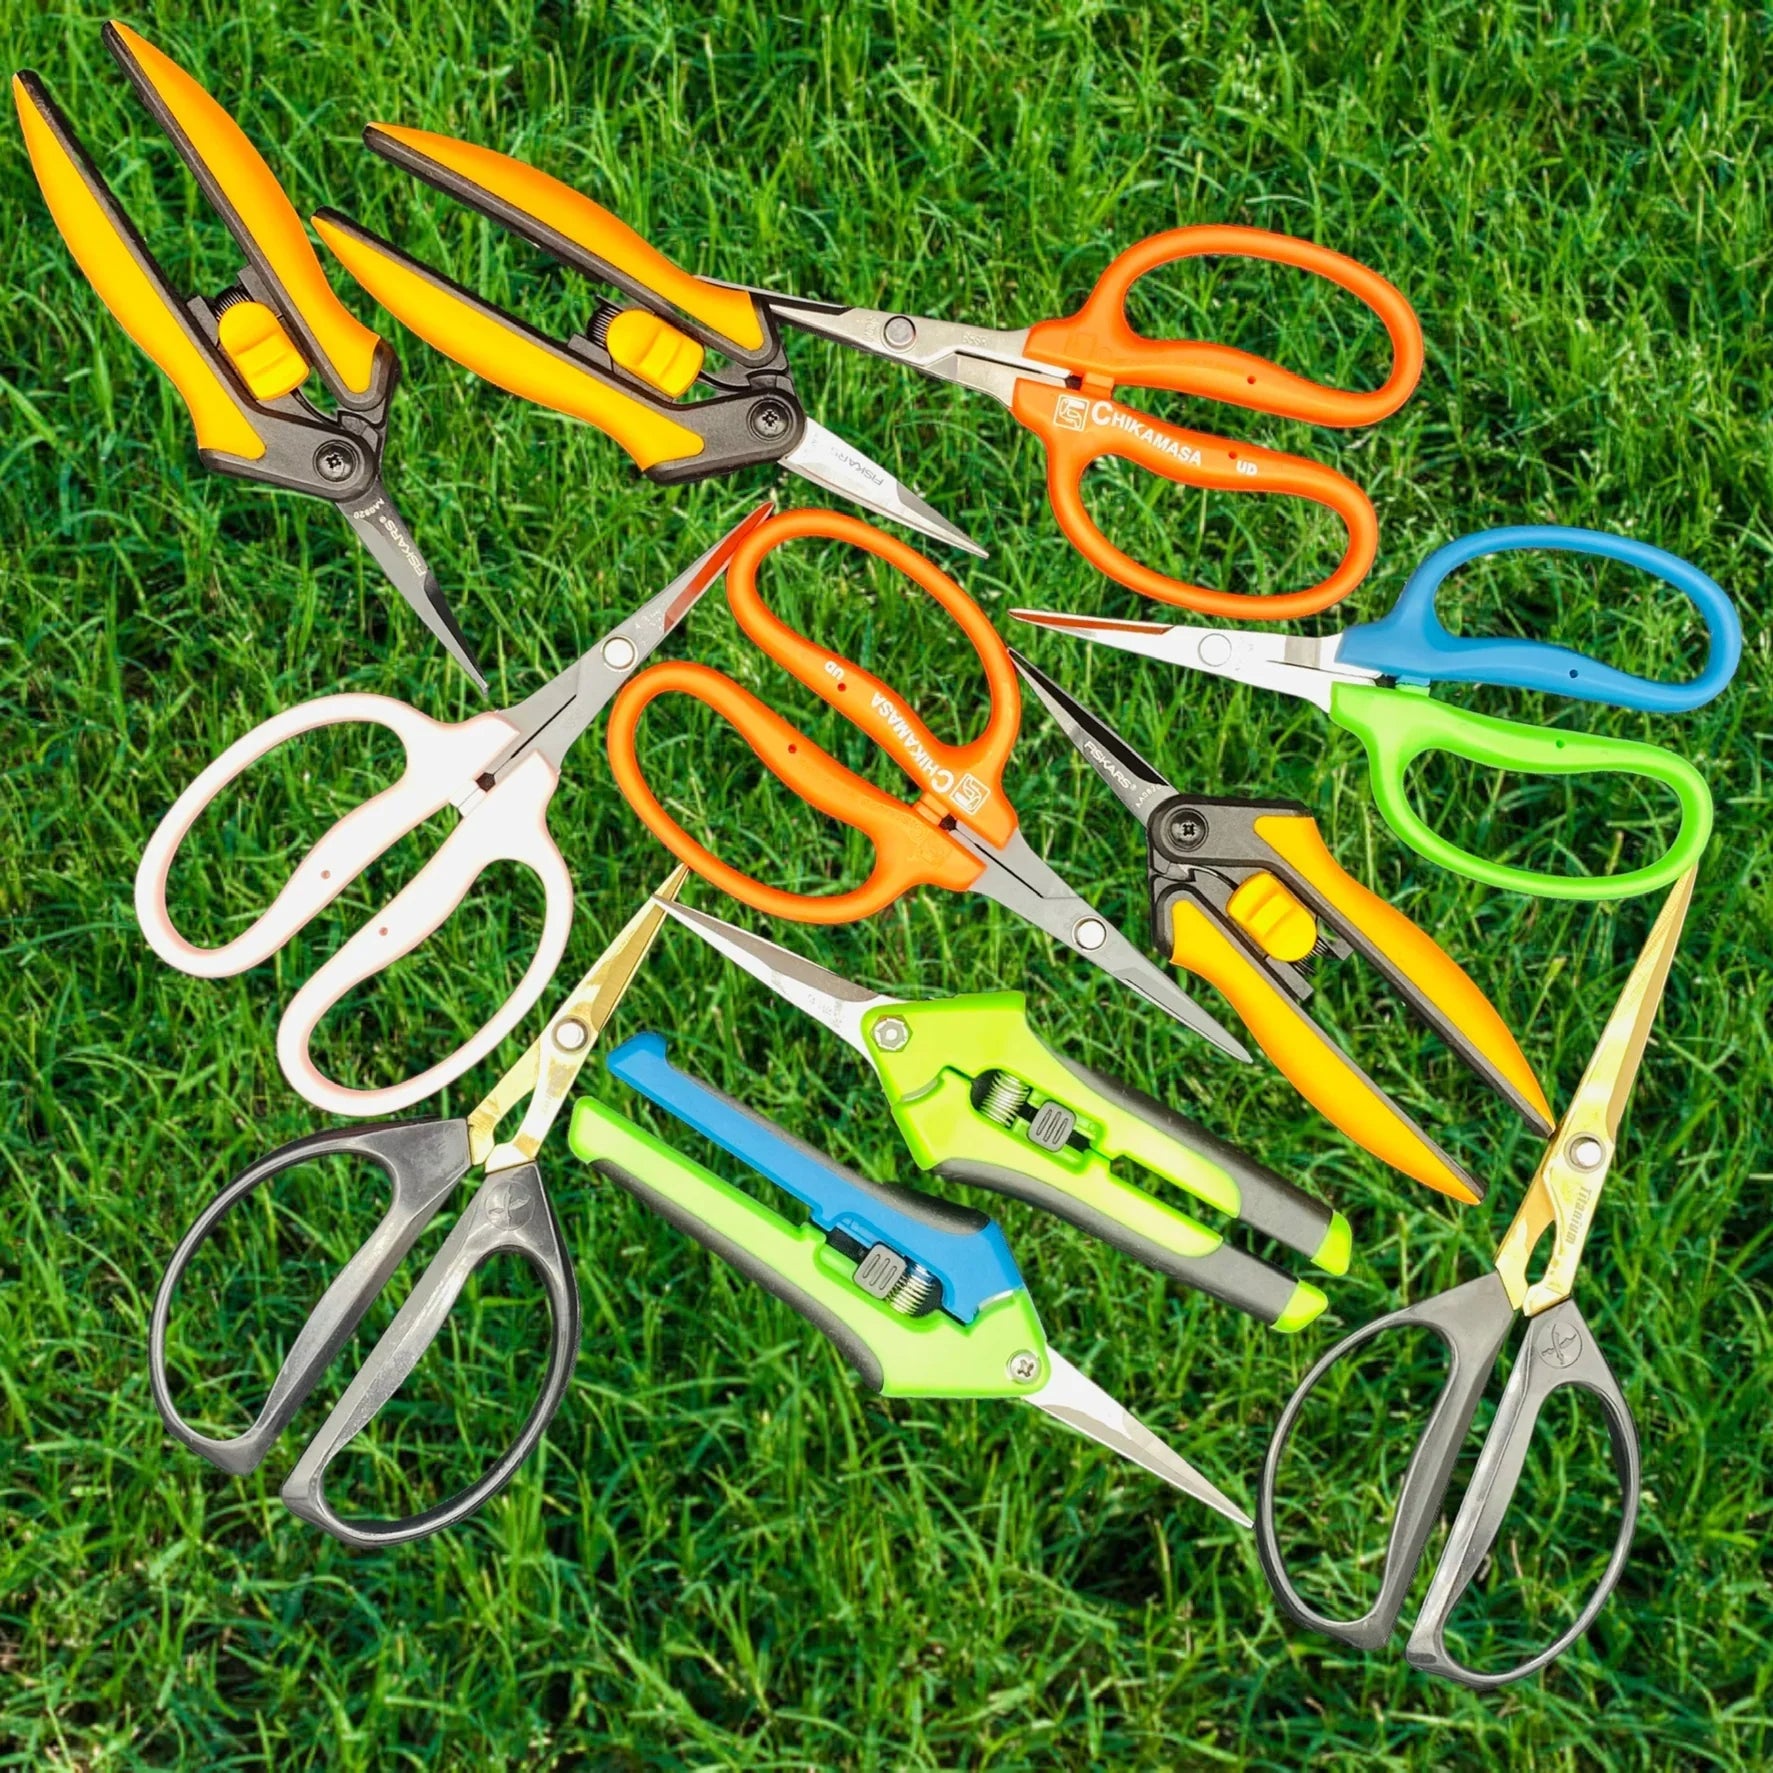 weed trimming scissors and shears